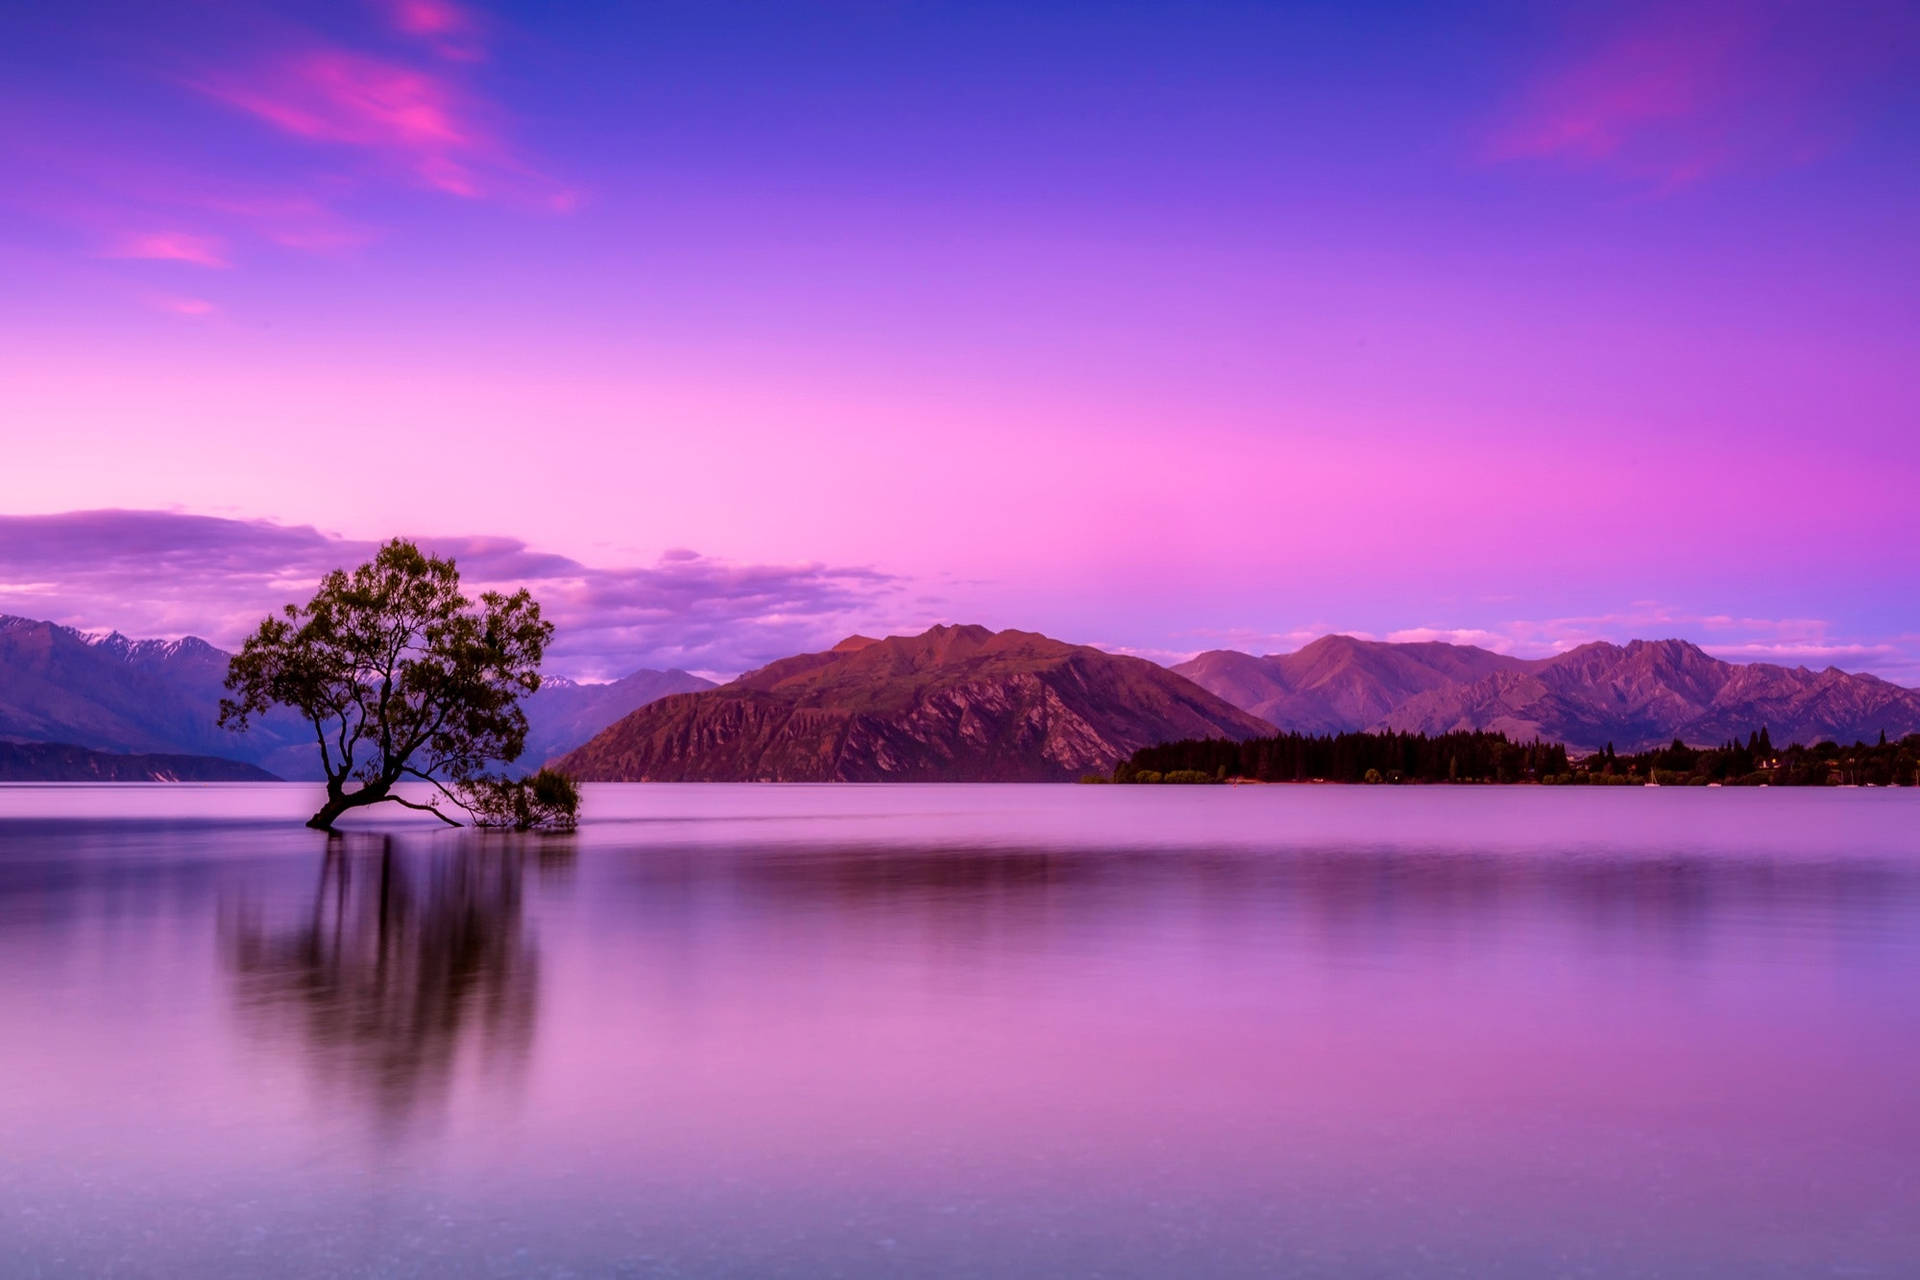 Aesthetic Sky Of Violet Over Mountains Background